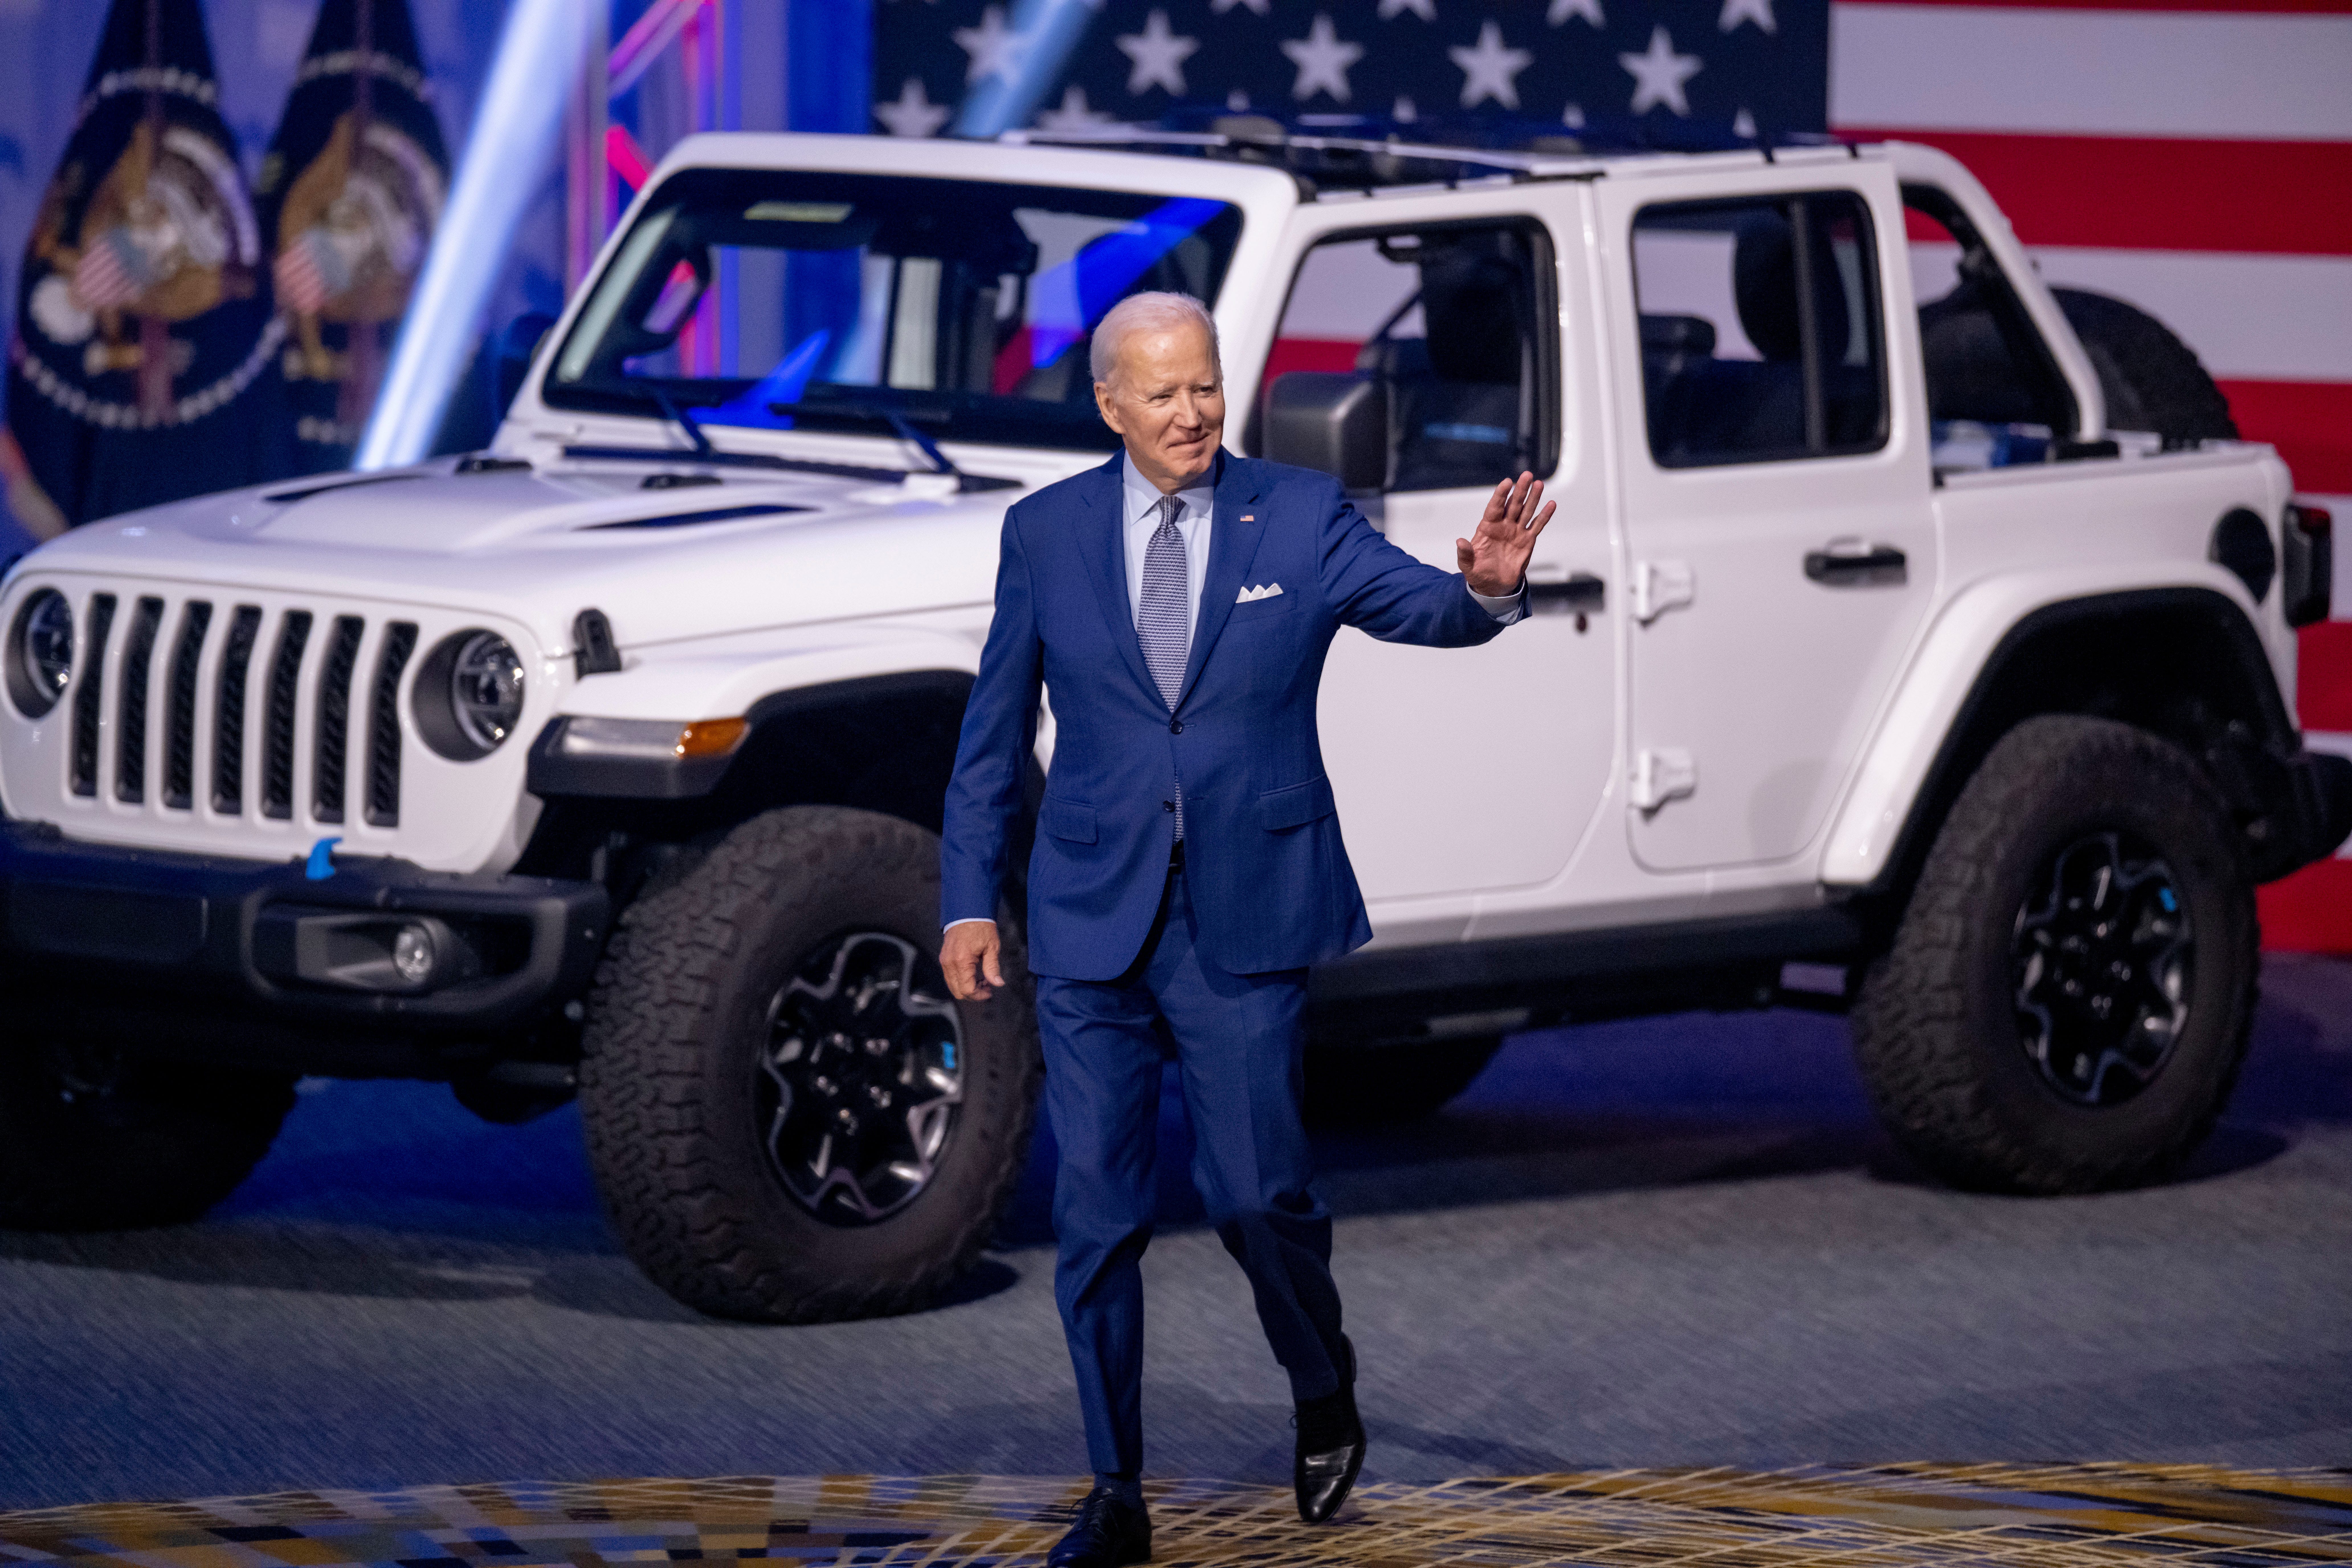 President Joe Biden comes out onto the stage for a speech while visiting the North American International Auto Show at Huntington Place, in Detroit, September 14, 2022.